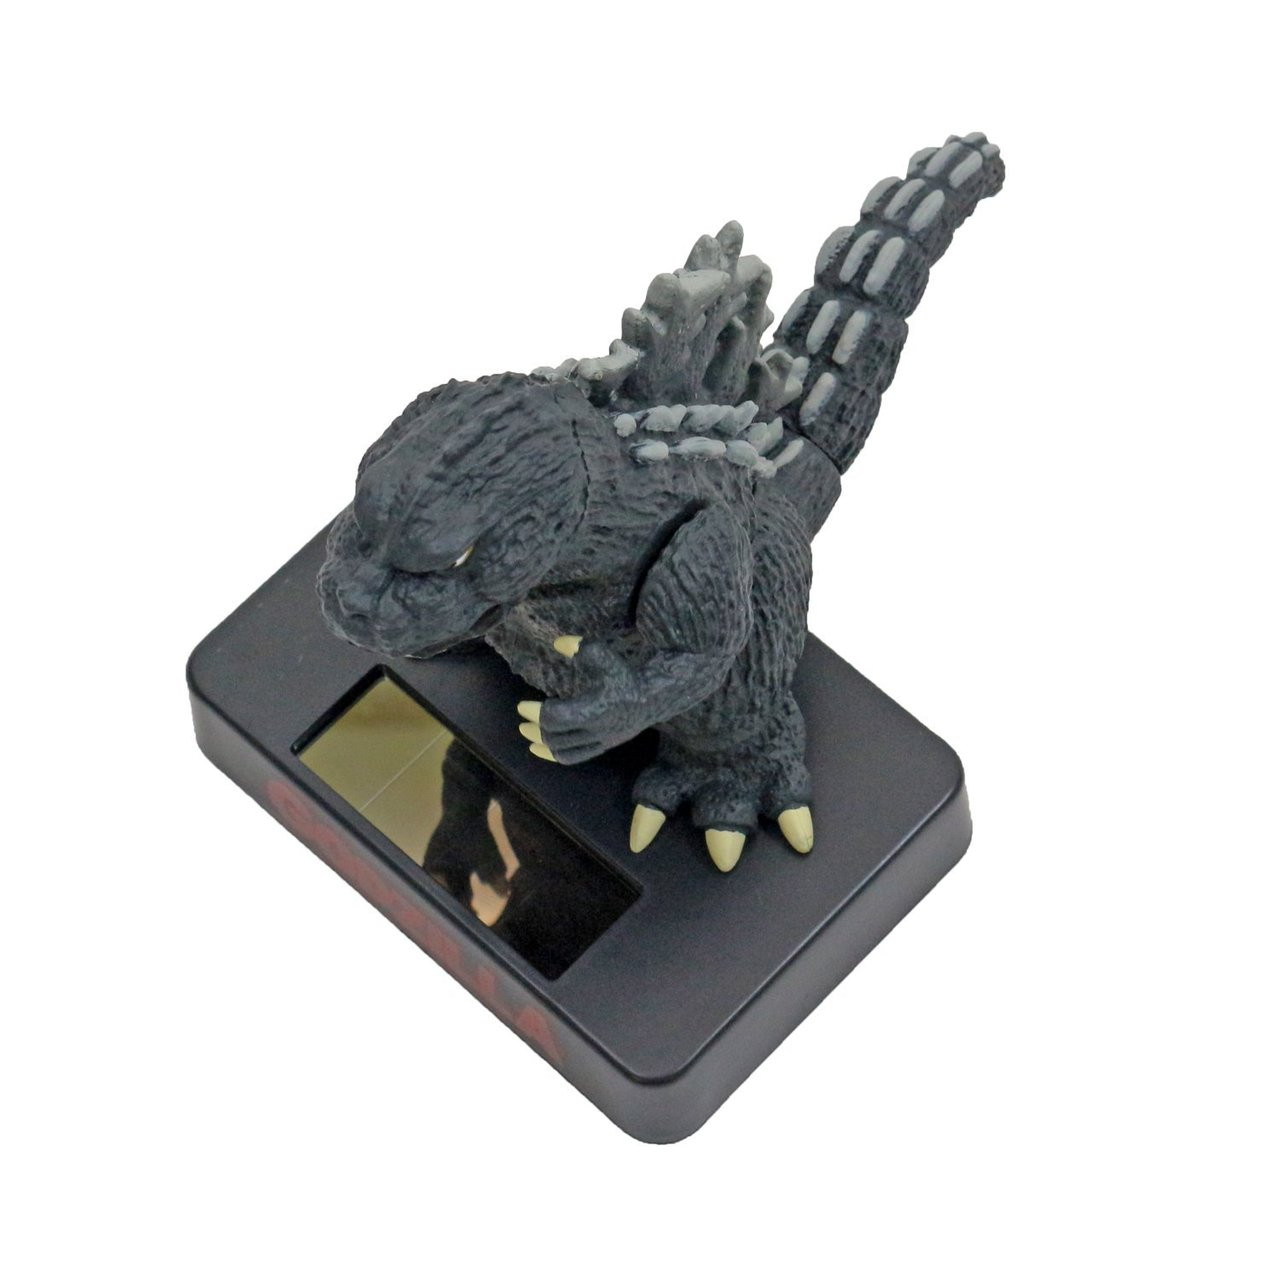 Folcart 509463 Godzilla Solar Mascot Message Plate Included Japan IMPORT for sale online